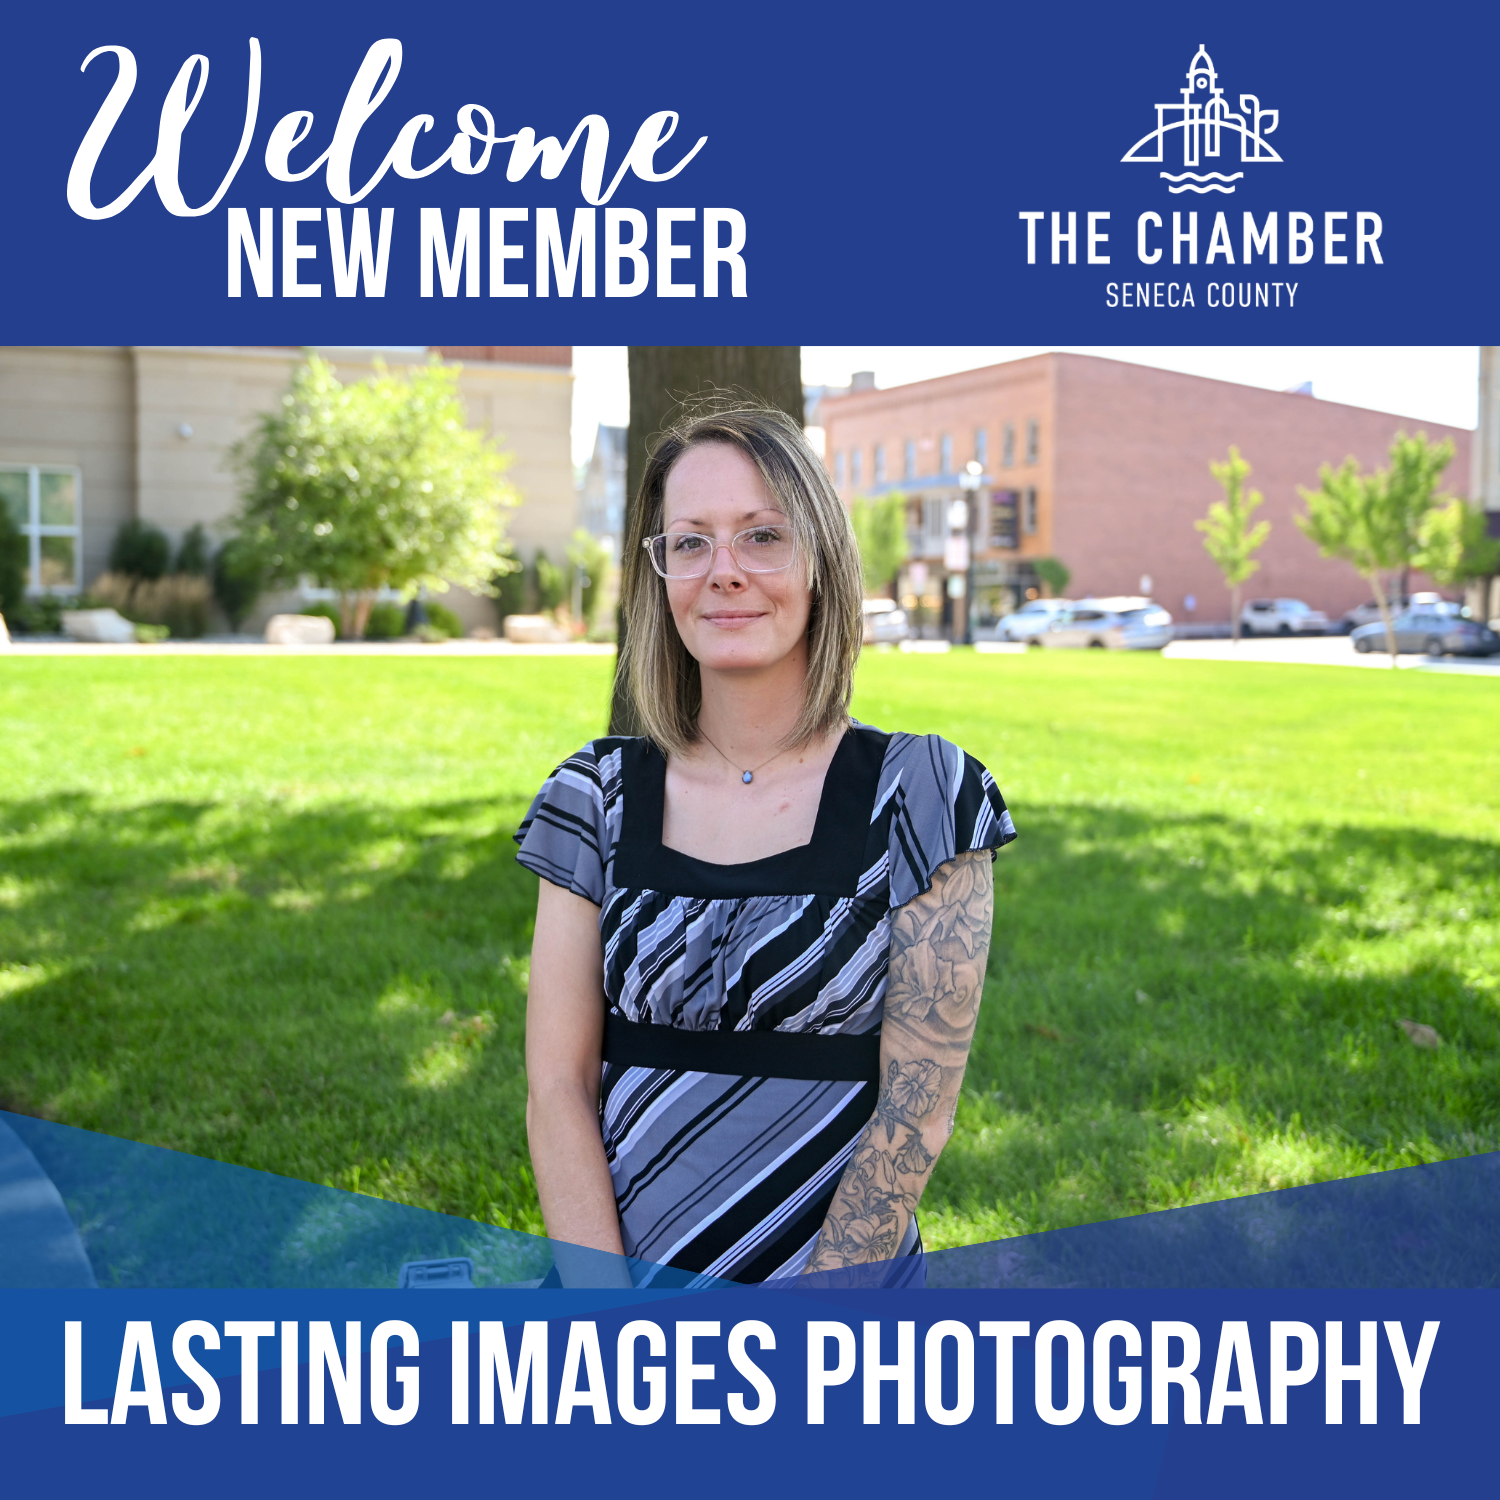 New Member: Lasting Images Photography, LLC